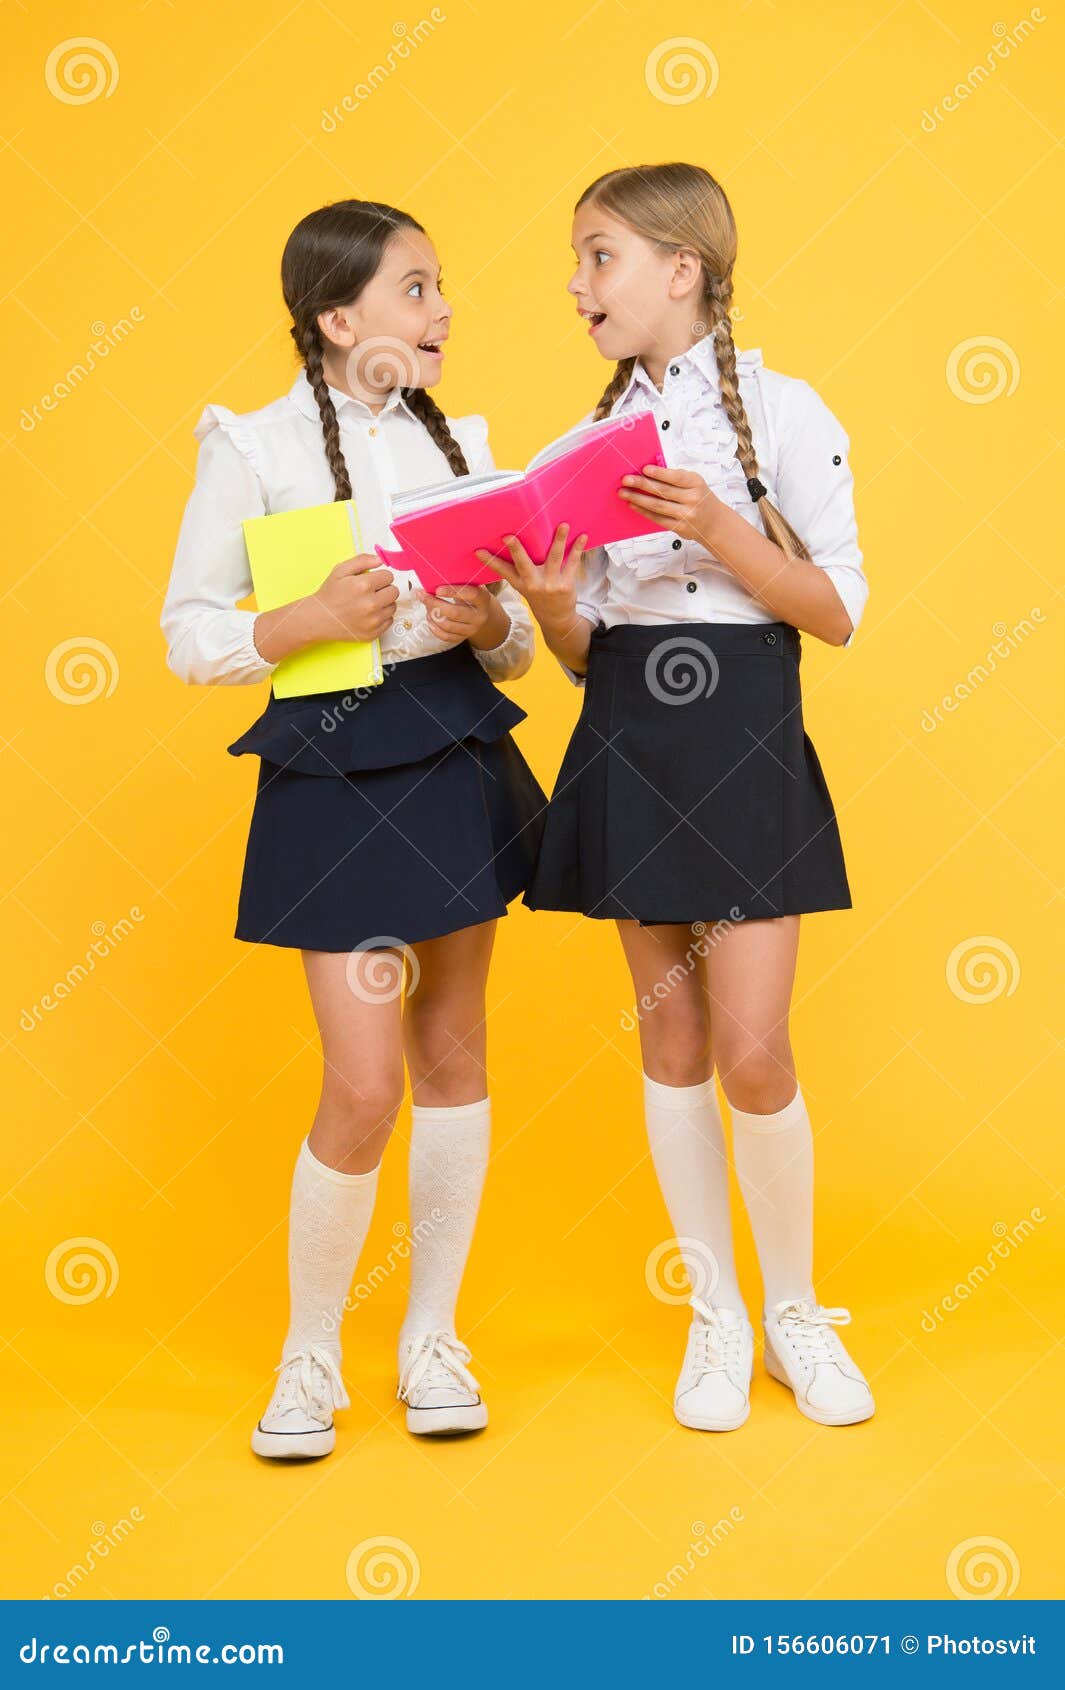 Friendship Goals. Cute School Girls with Books. First Day at ...